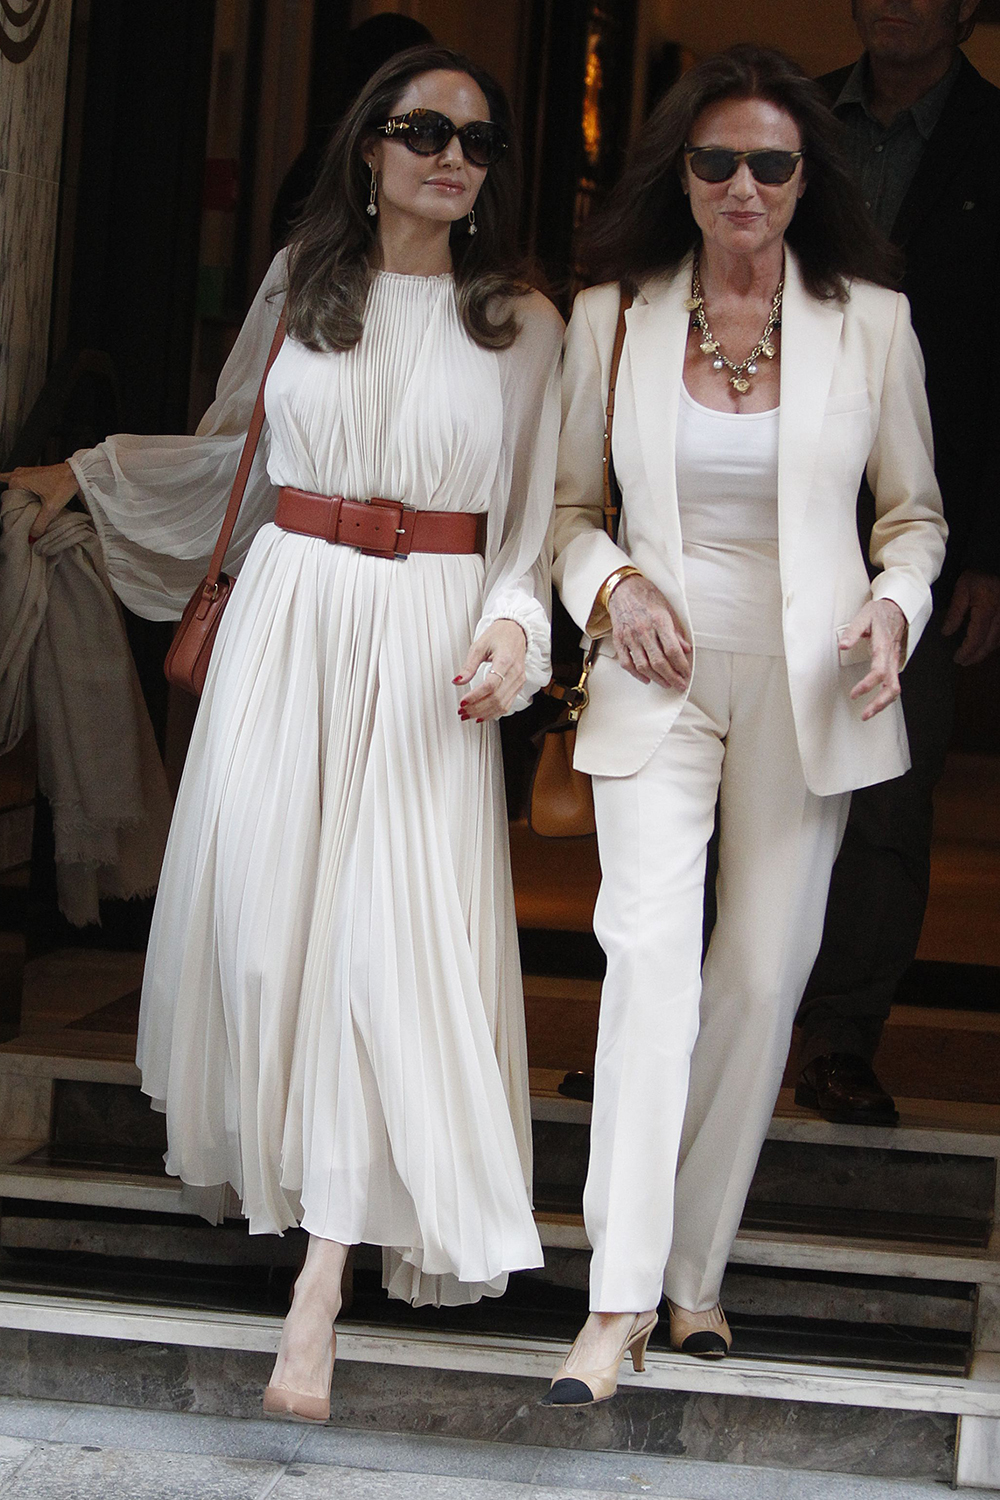 Angelina Jolie Looks So Riche in These Outfits in Paris